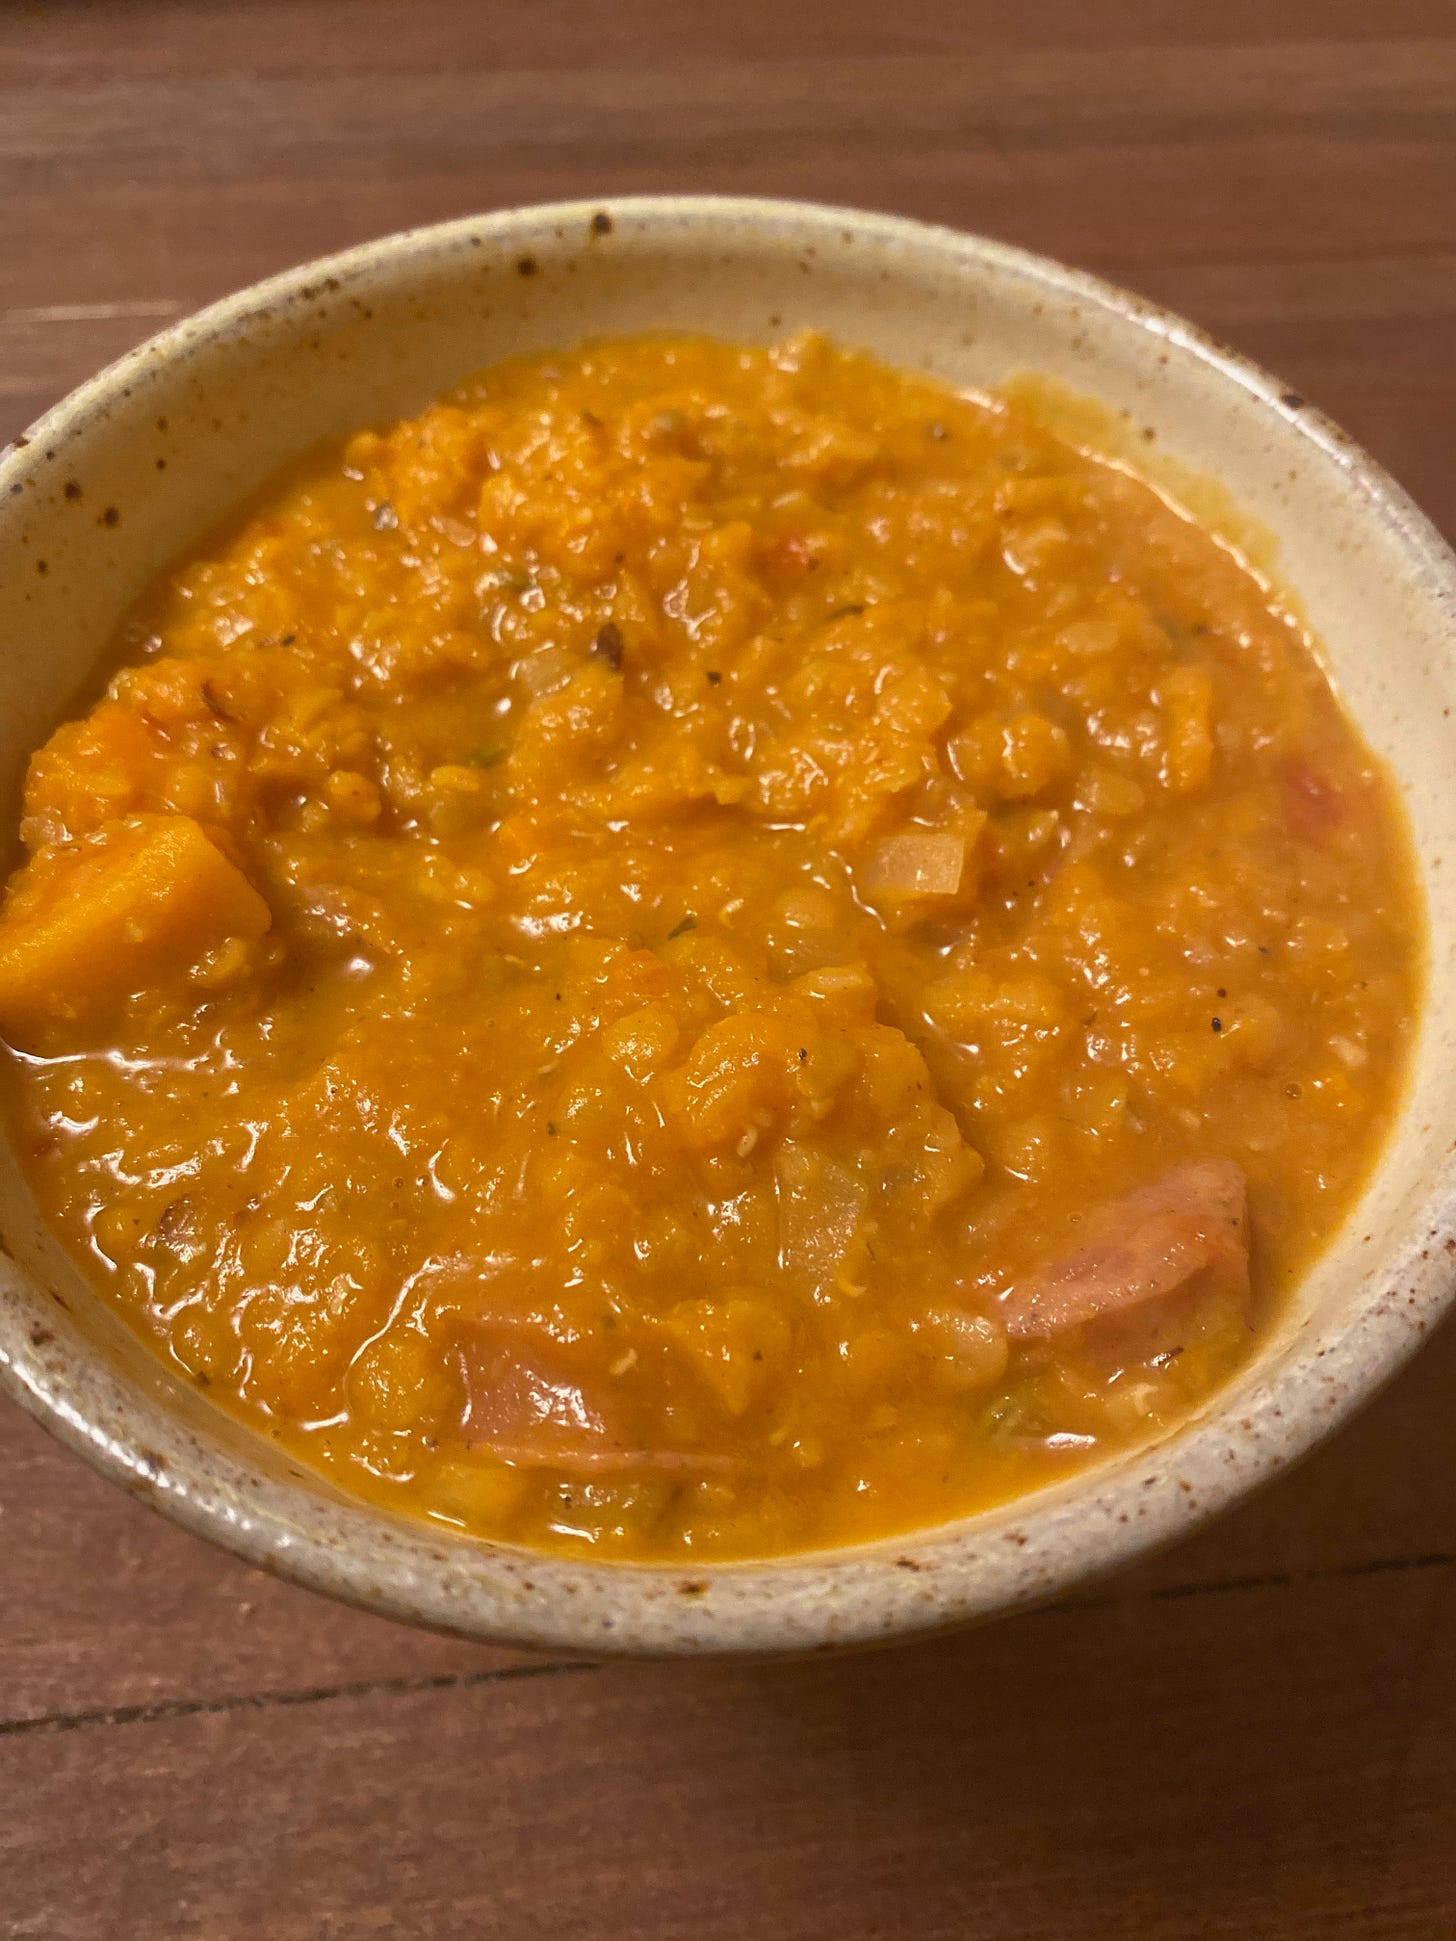 A ceramic bowl of red lentil stew, with chunks of butternut squash and pieces of sausage.